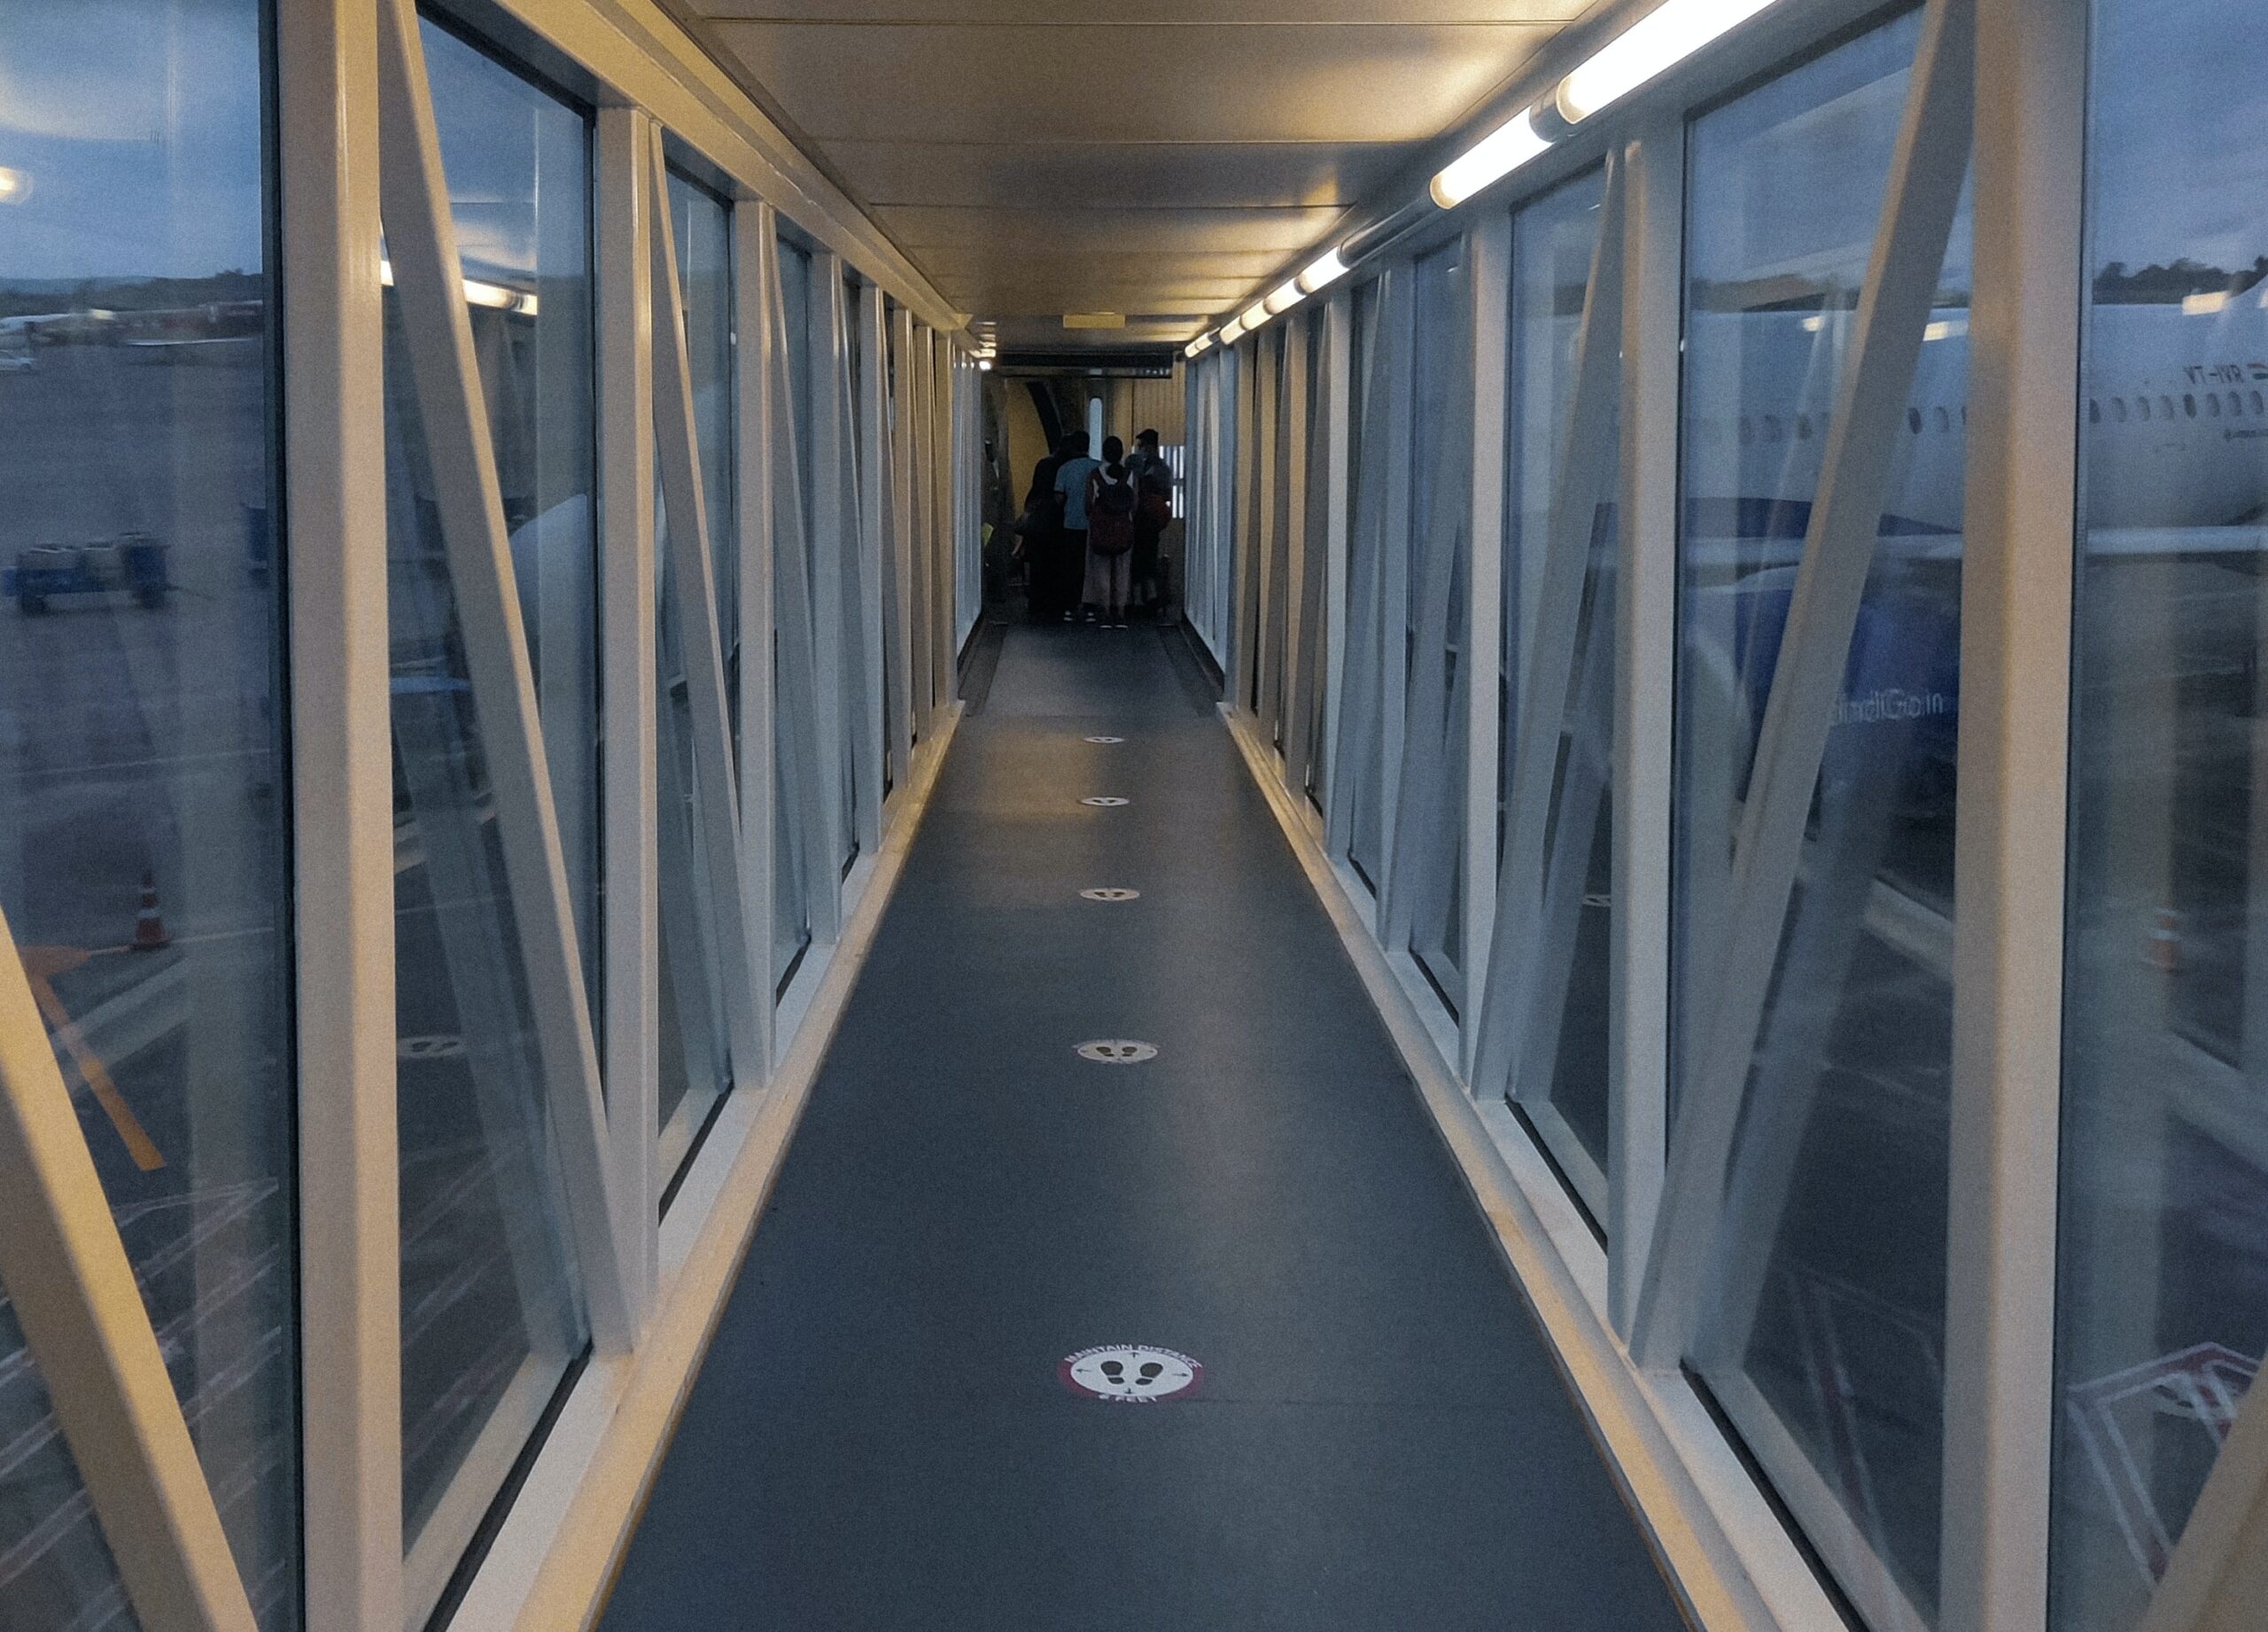 There are many safety regulations that airlines have to abide by to continue to fly passengers. Frontier is one of the many airlines that comply. 
Pictured: Airplane tunnel with passengers boarding 